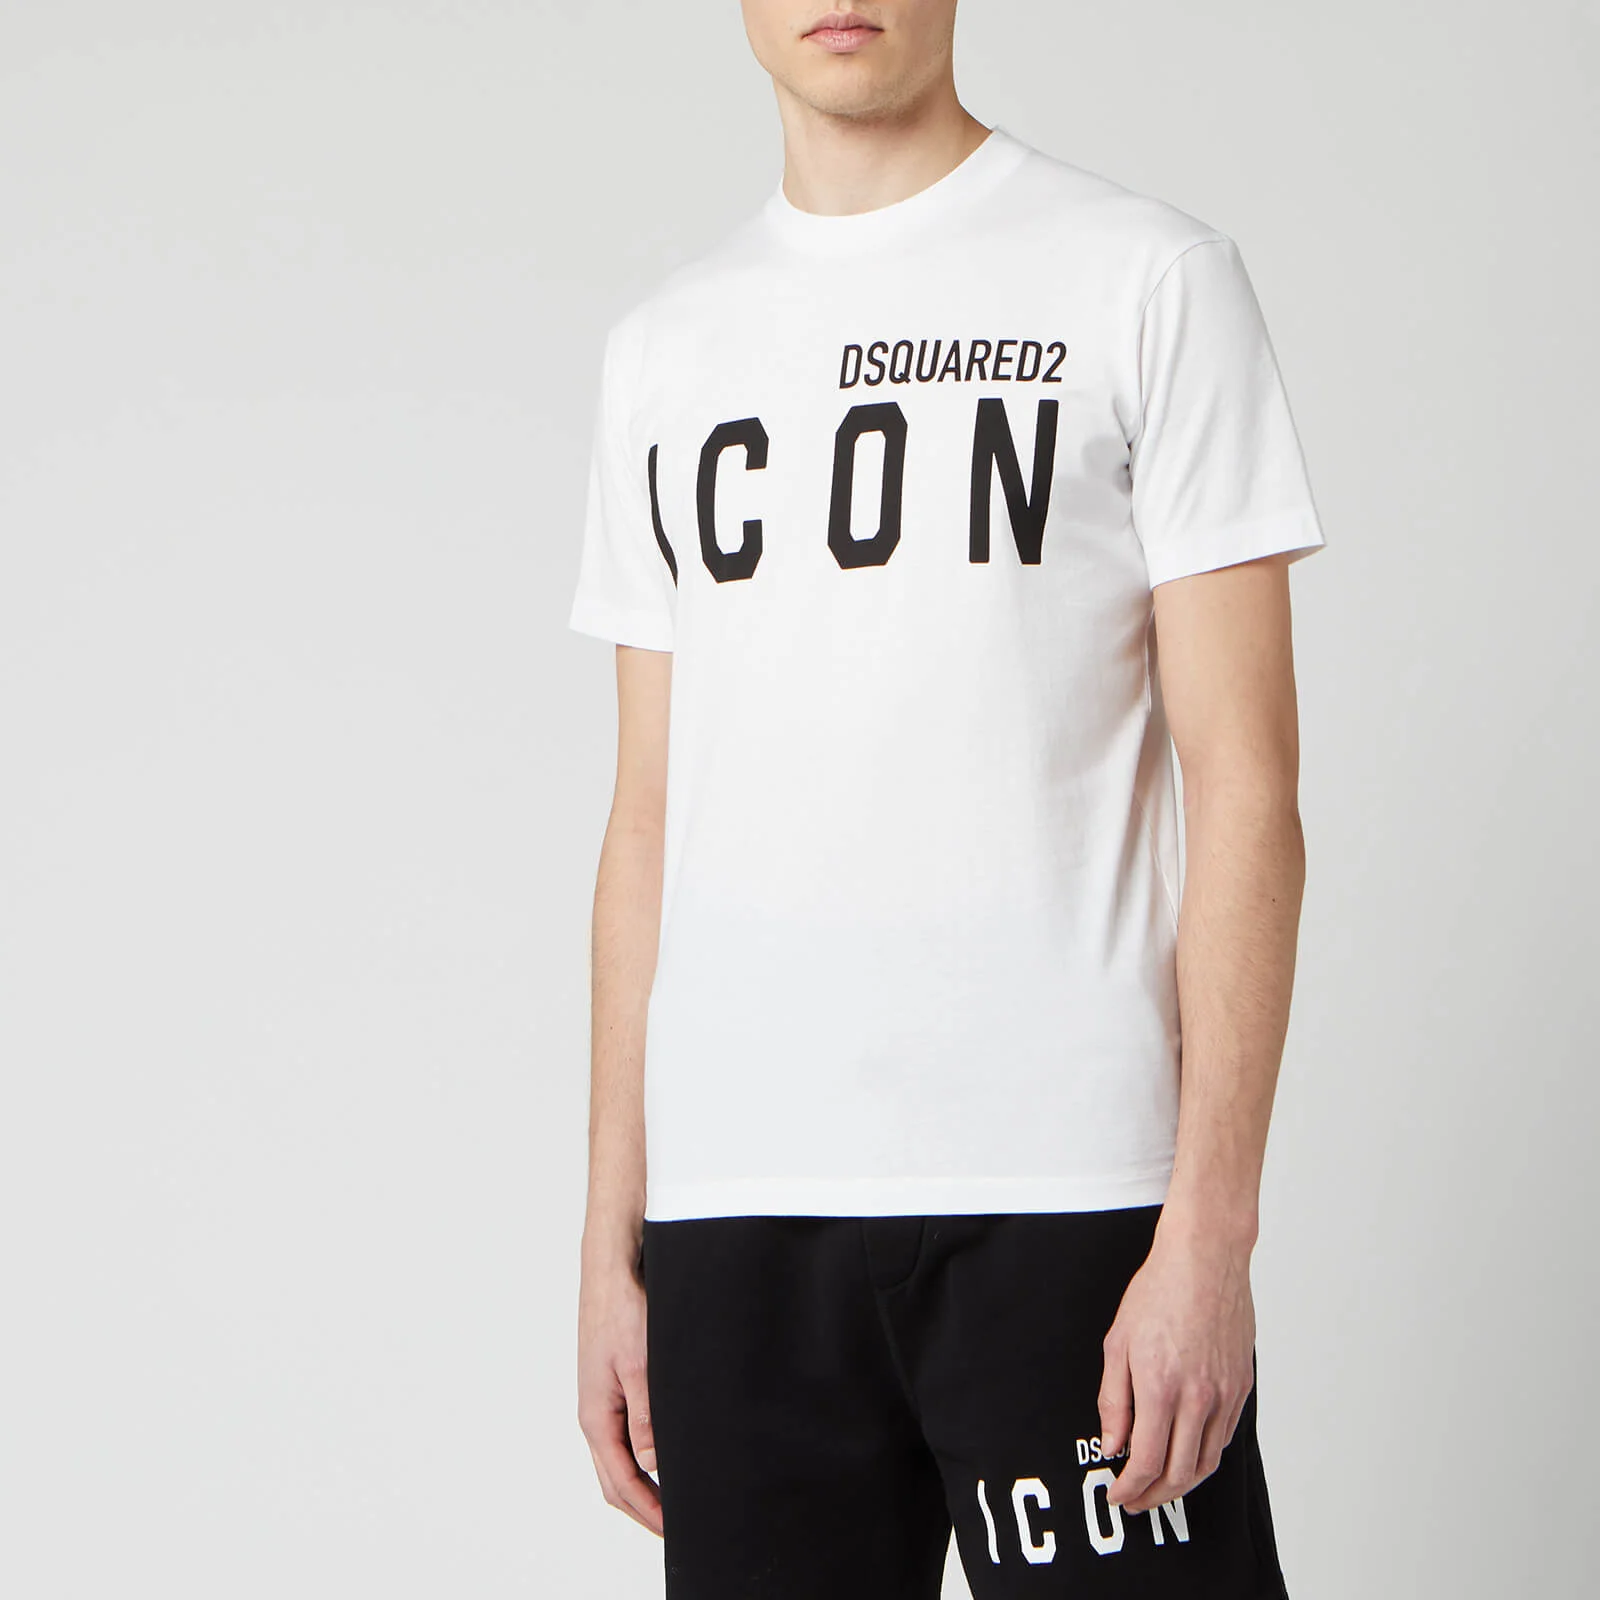 Dsquared2 Men's Cool Fit Icon T-Shirt - White Image 1